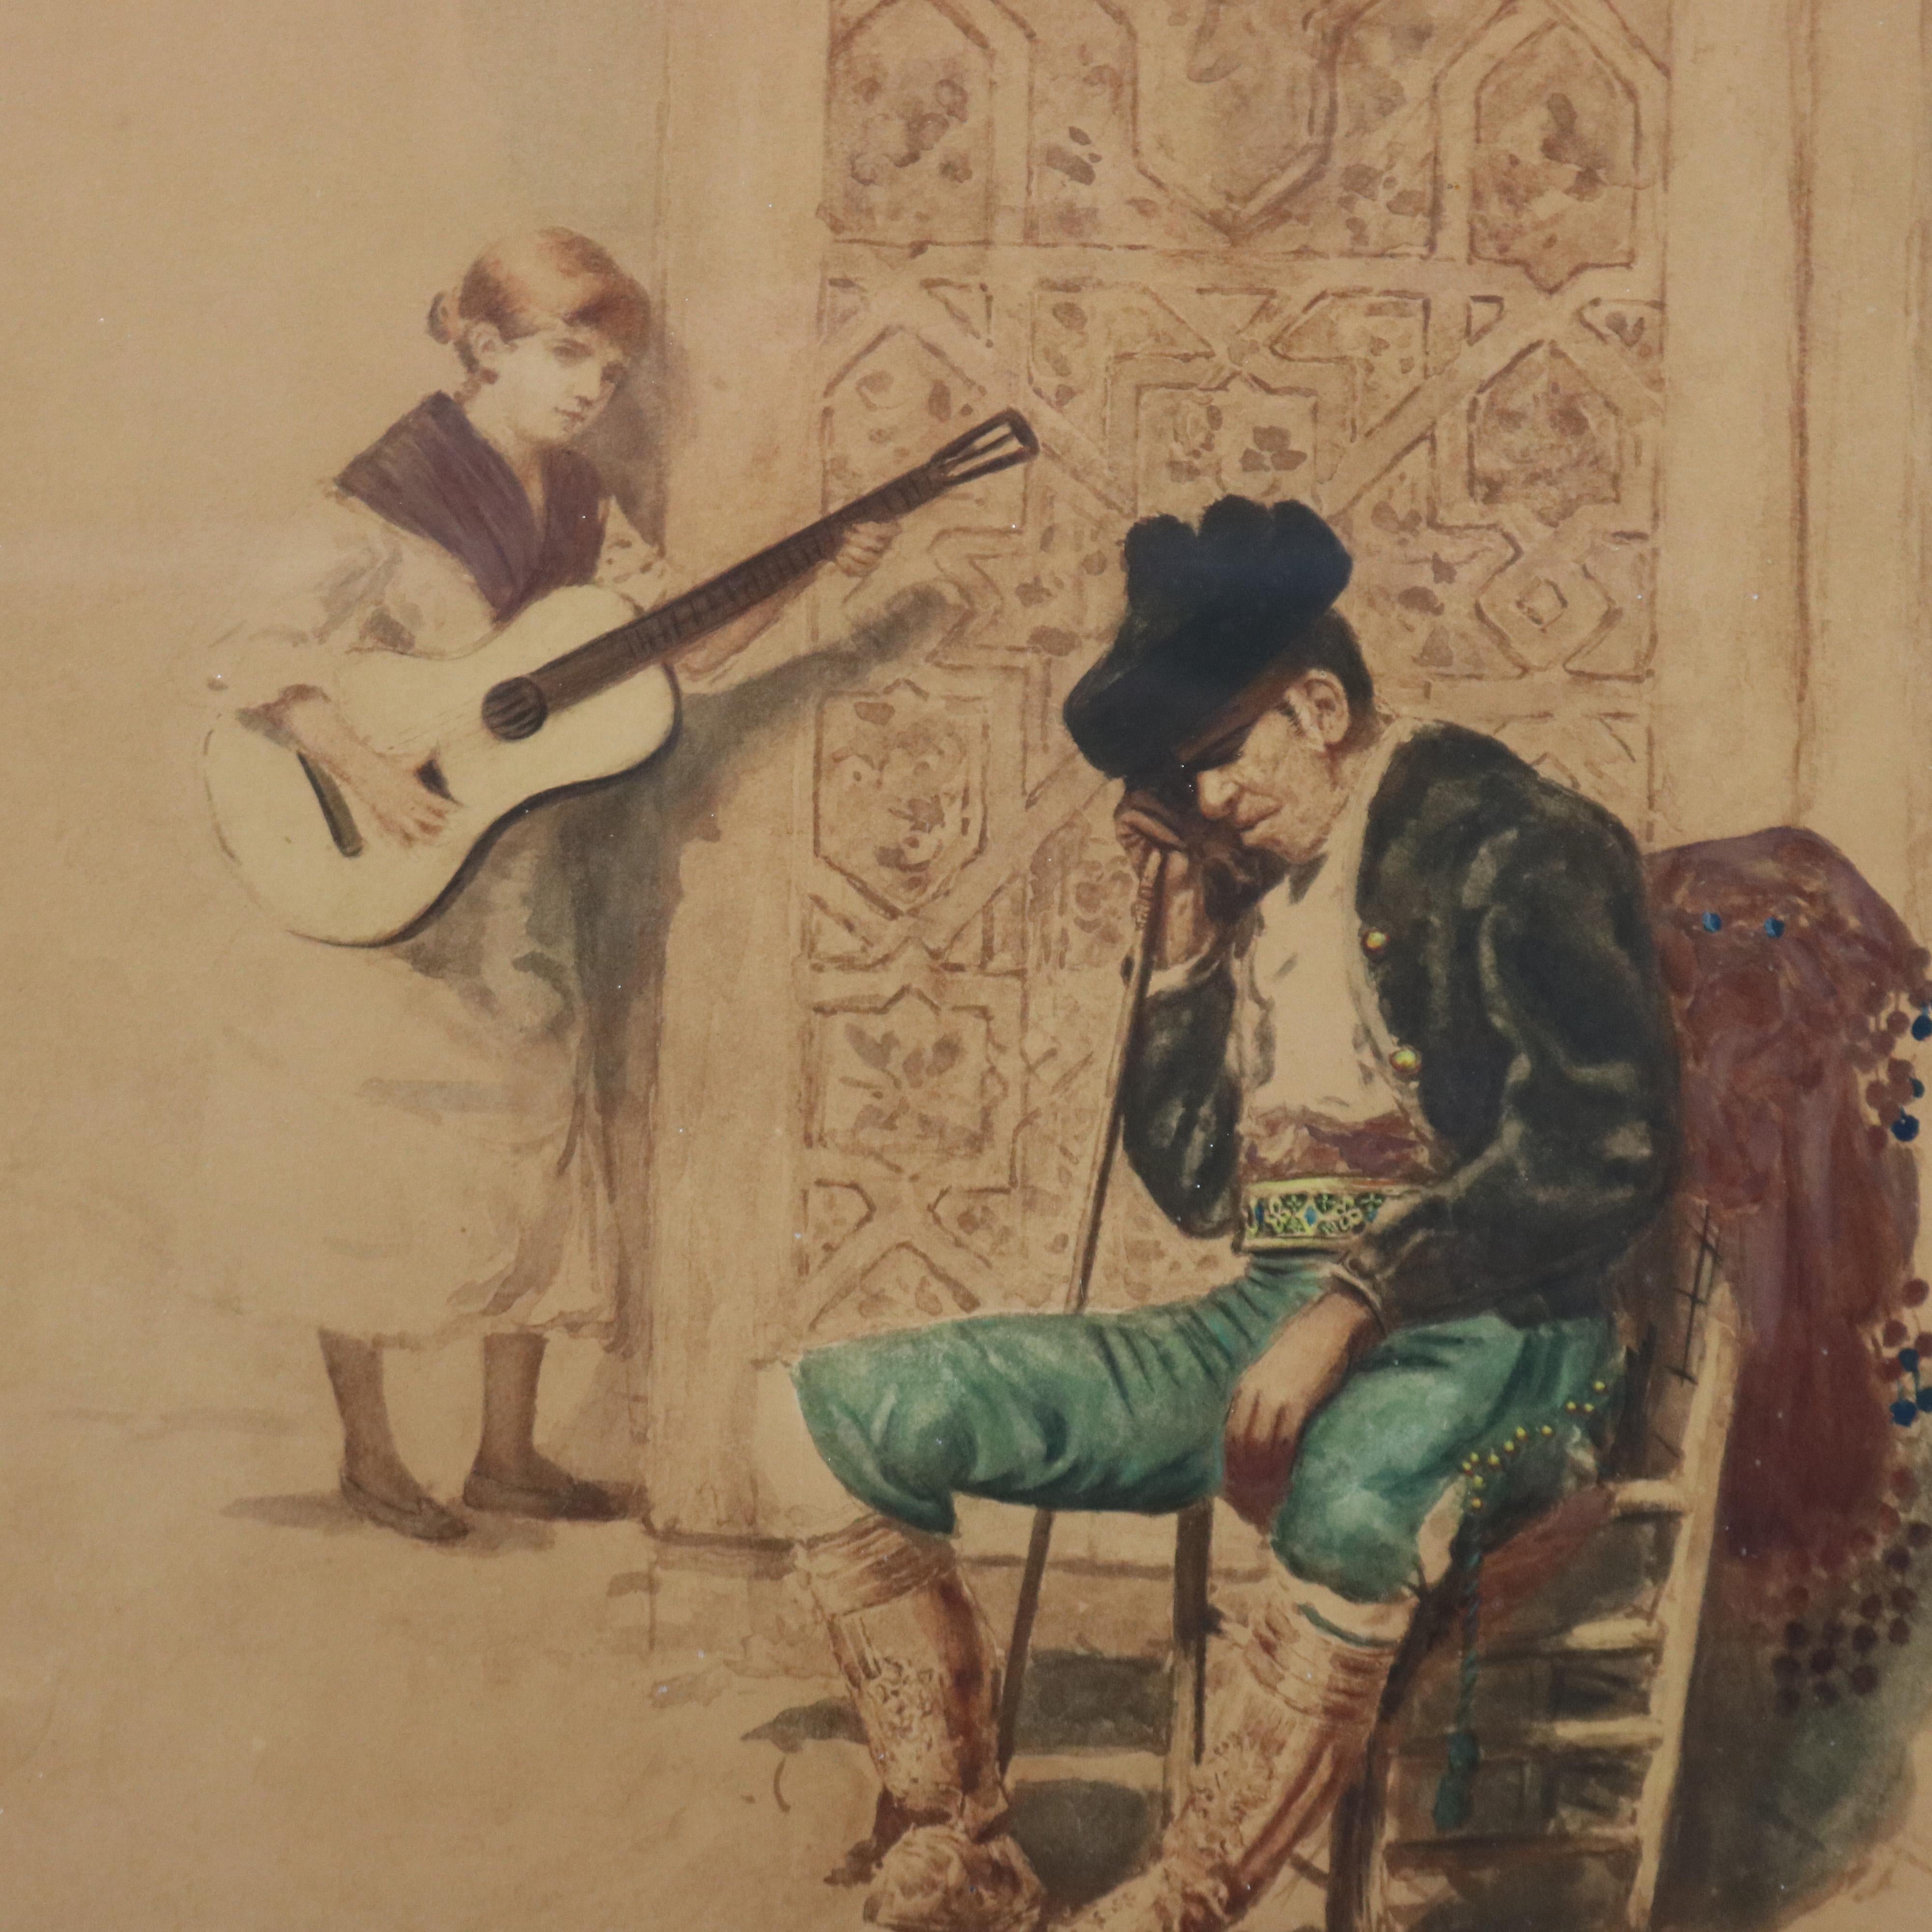 An antique Spanish print depicts Spaniard Siesta with girl playing guitar, signed G Ferris, matted and framed, c1888

Measures - 27